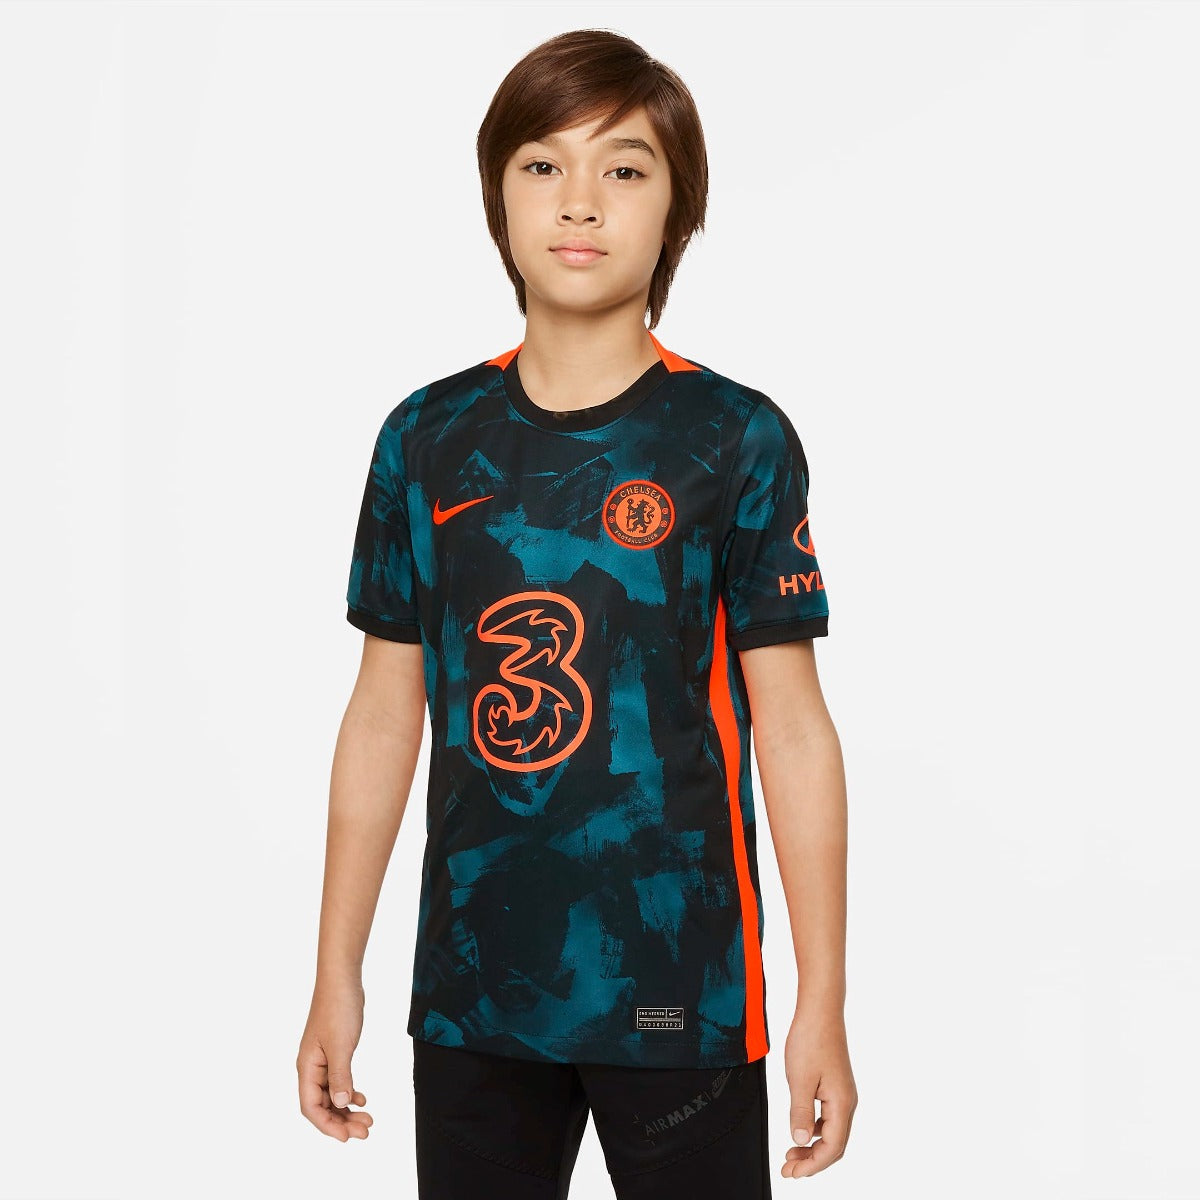 Nike 2021-22 Chelsea Youth Third jersey - Black-Teal-Orange (Model - Front)